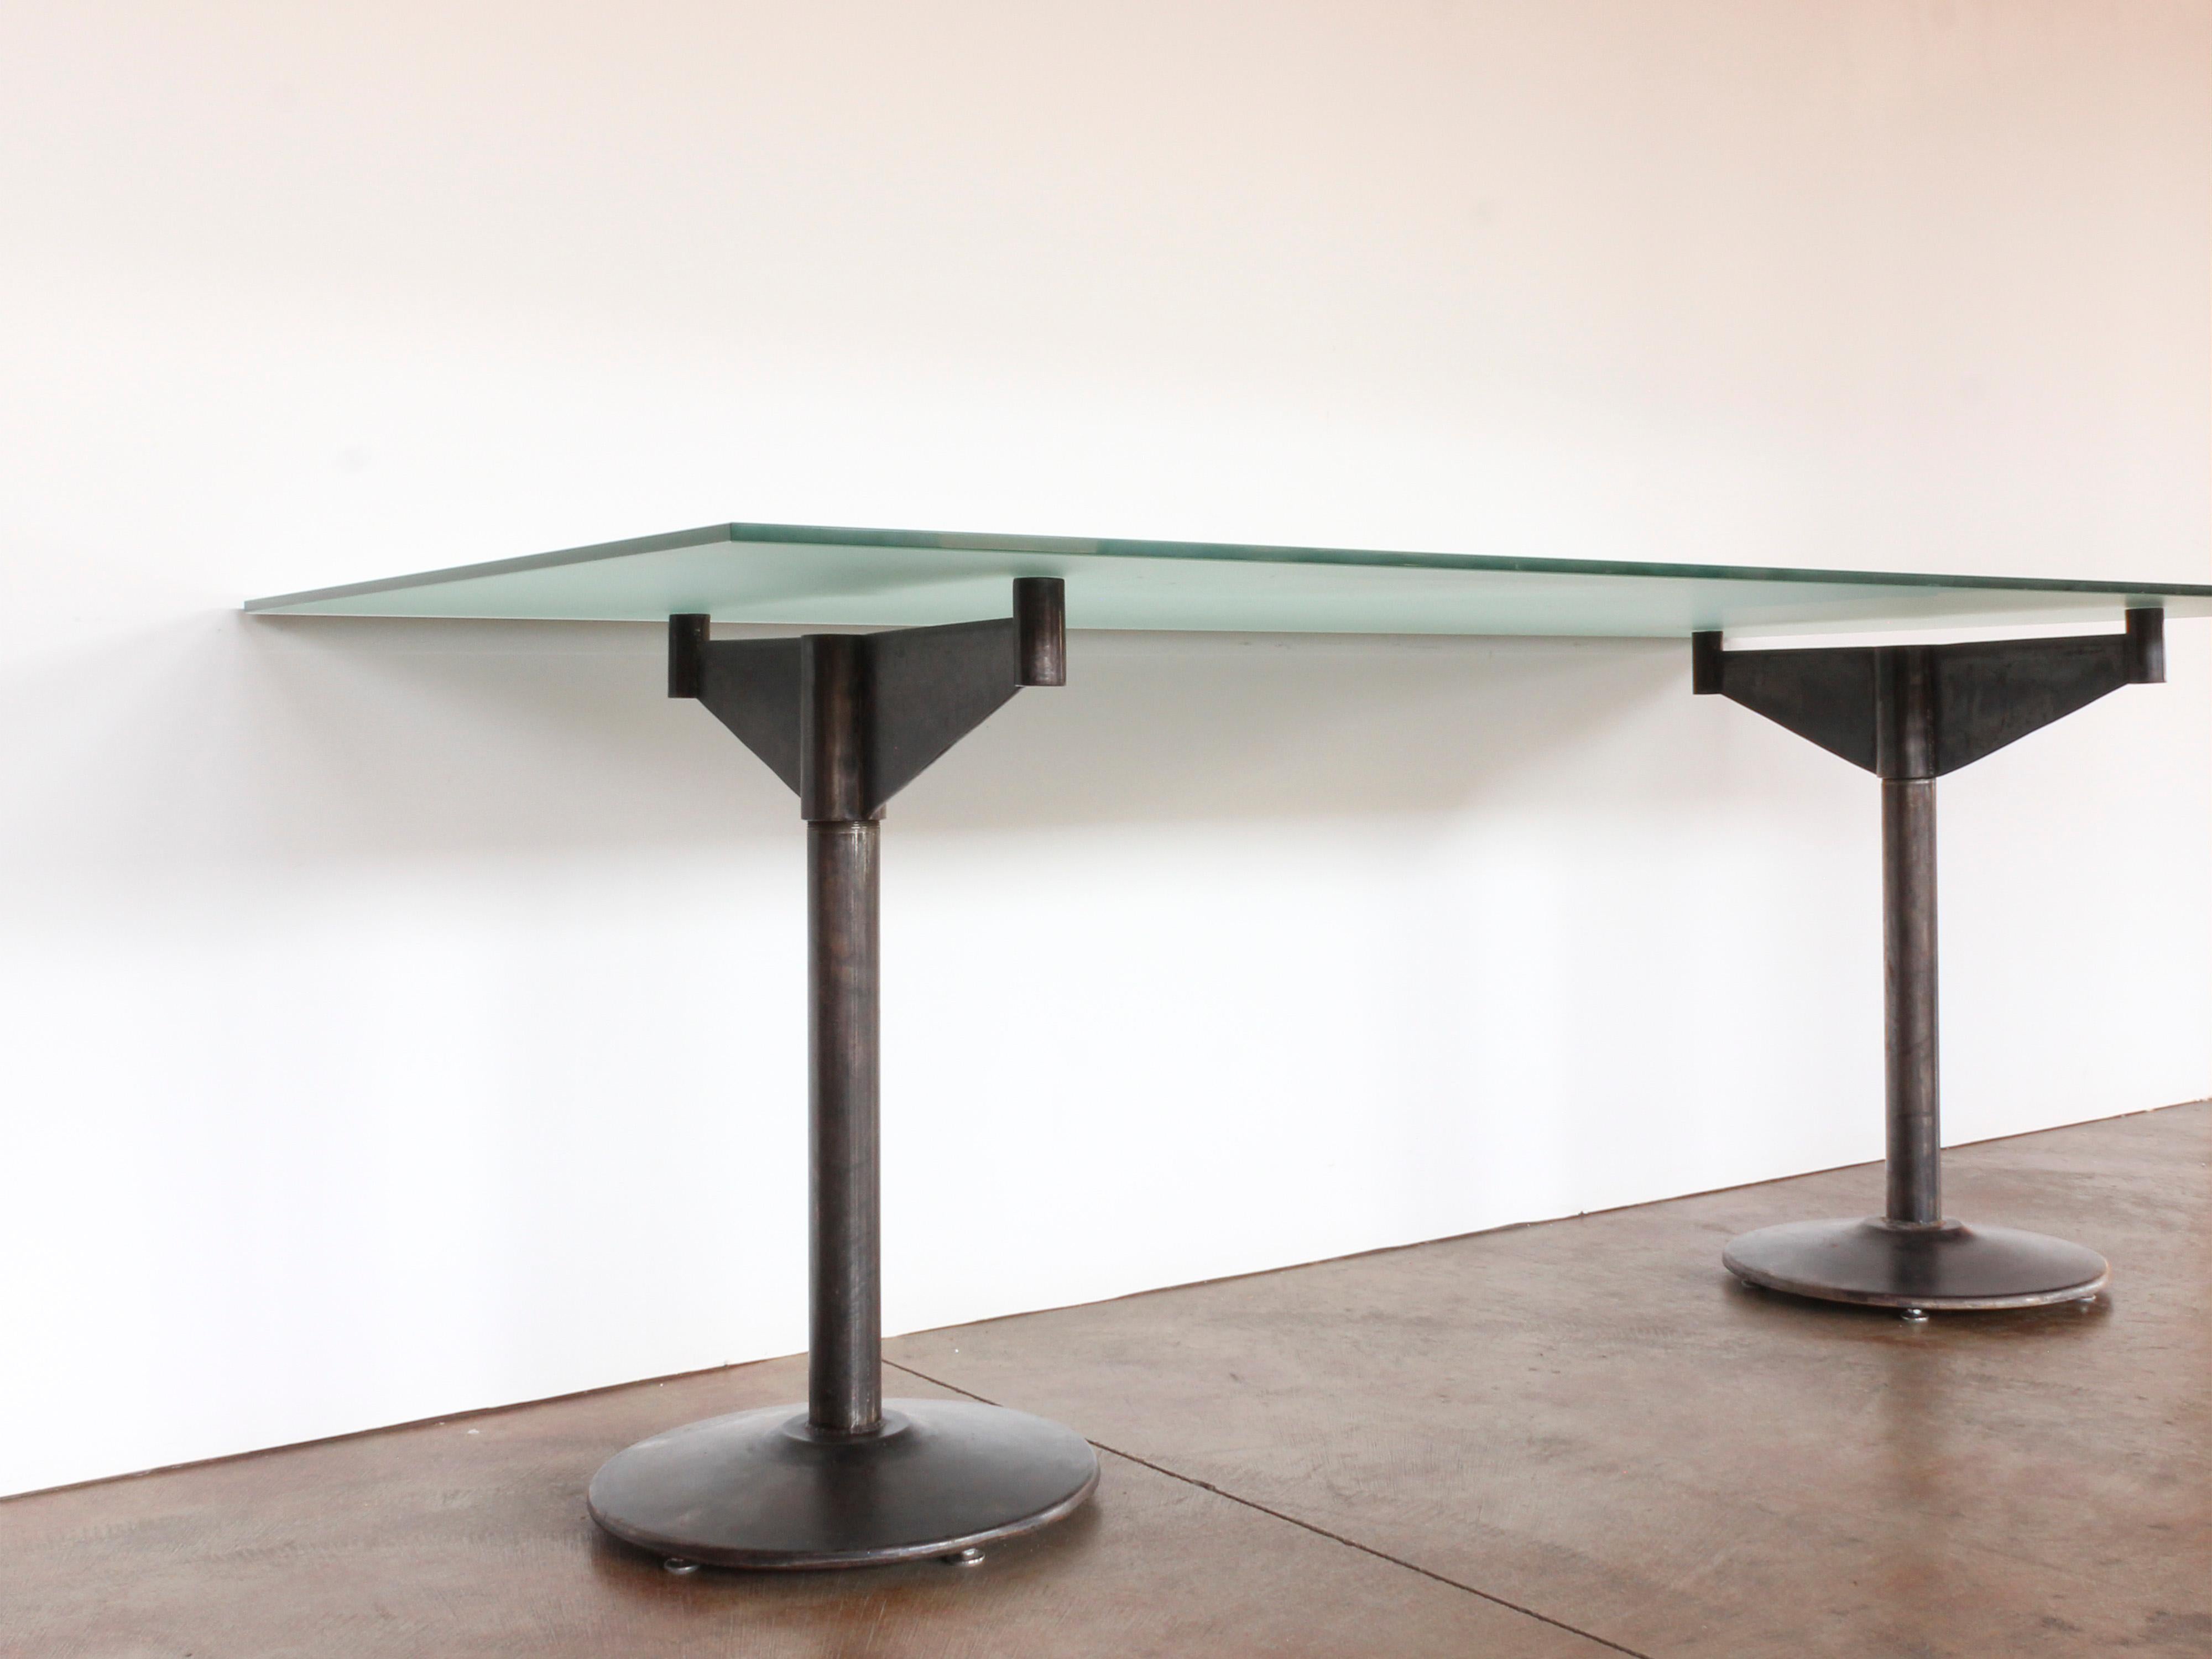 20th c. American Industrial Style Iron Pedestal Table with Frosted Glass Top For Sale 9